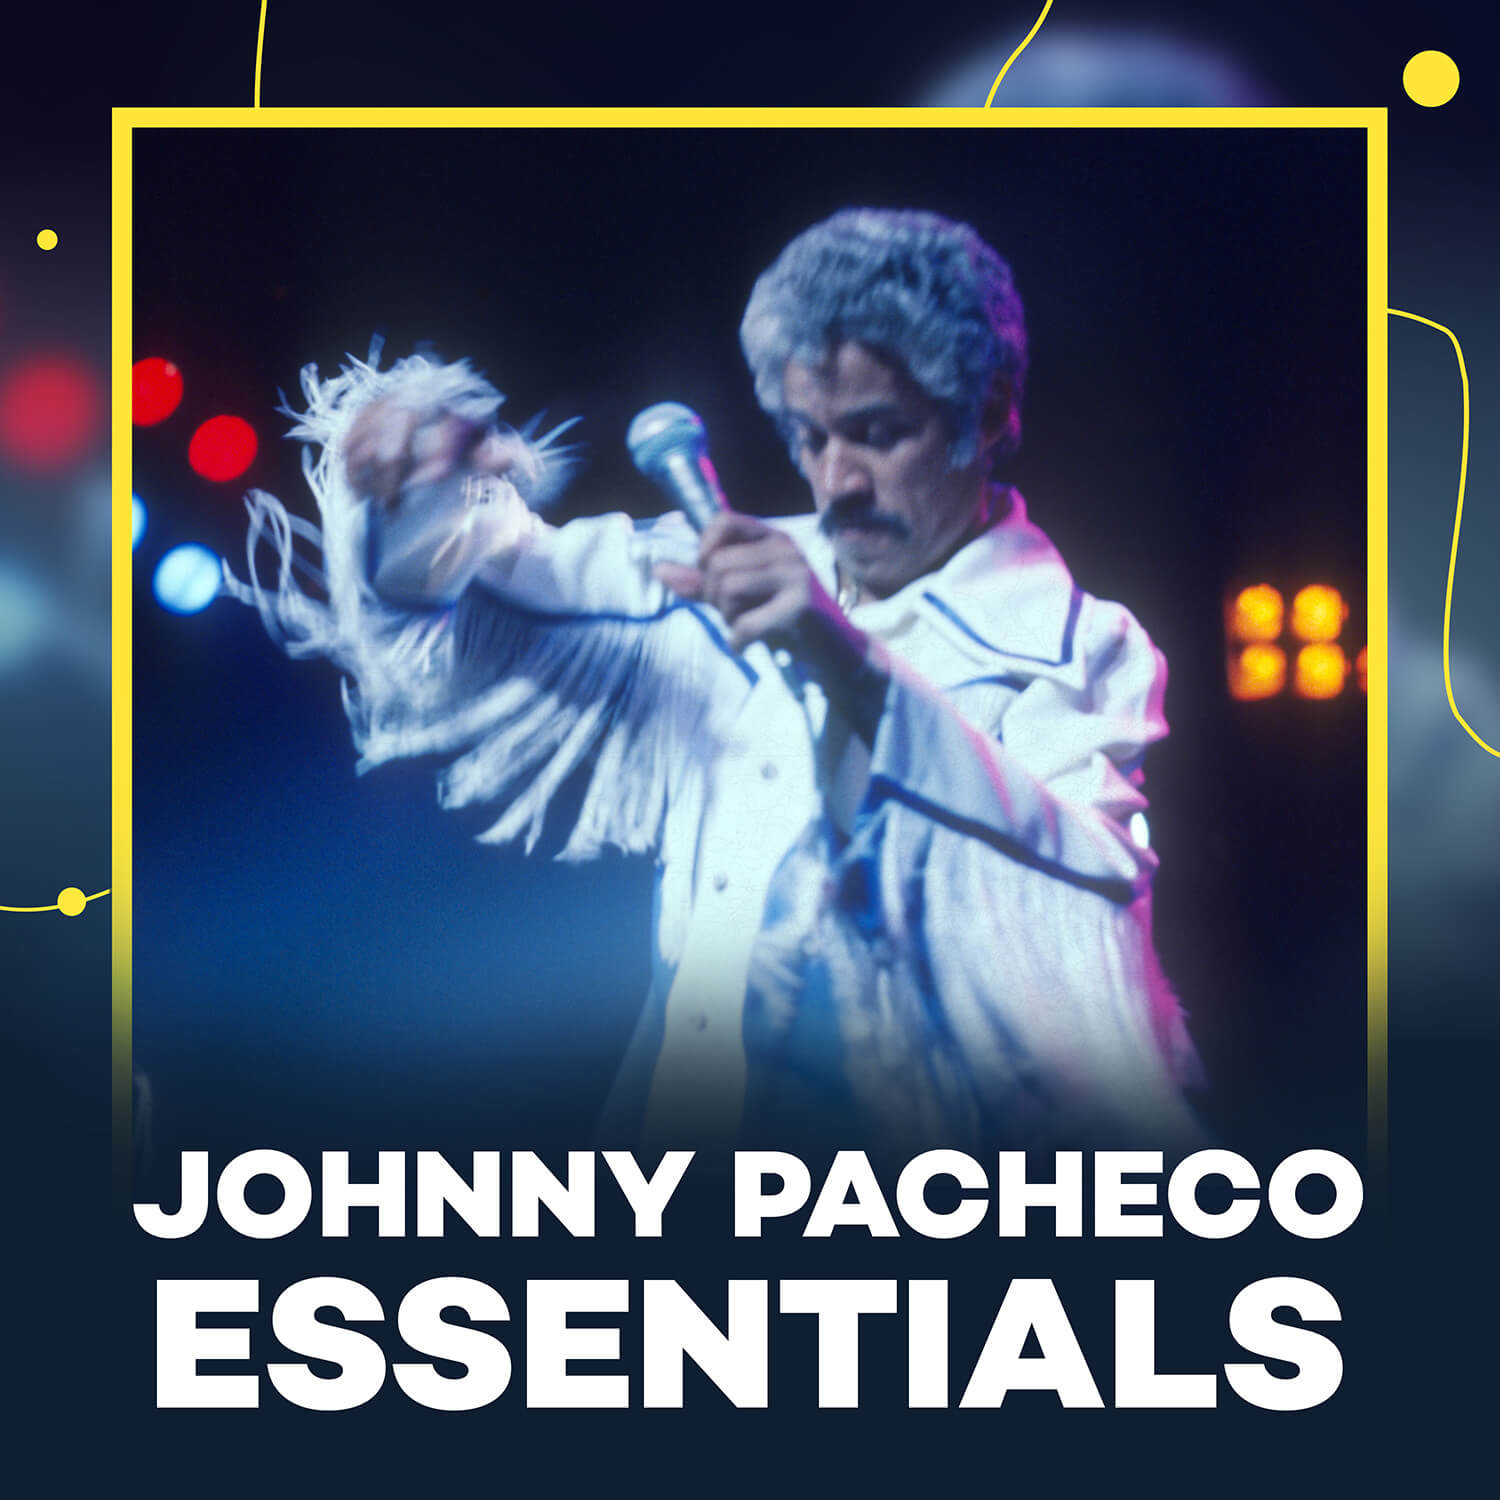 Featured image for “Johnny Pacheco”